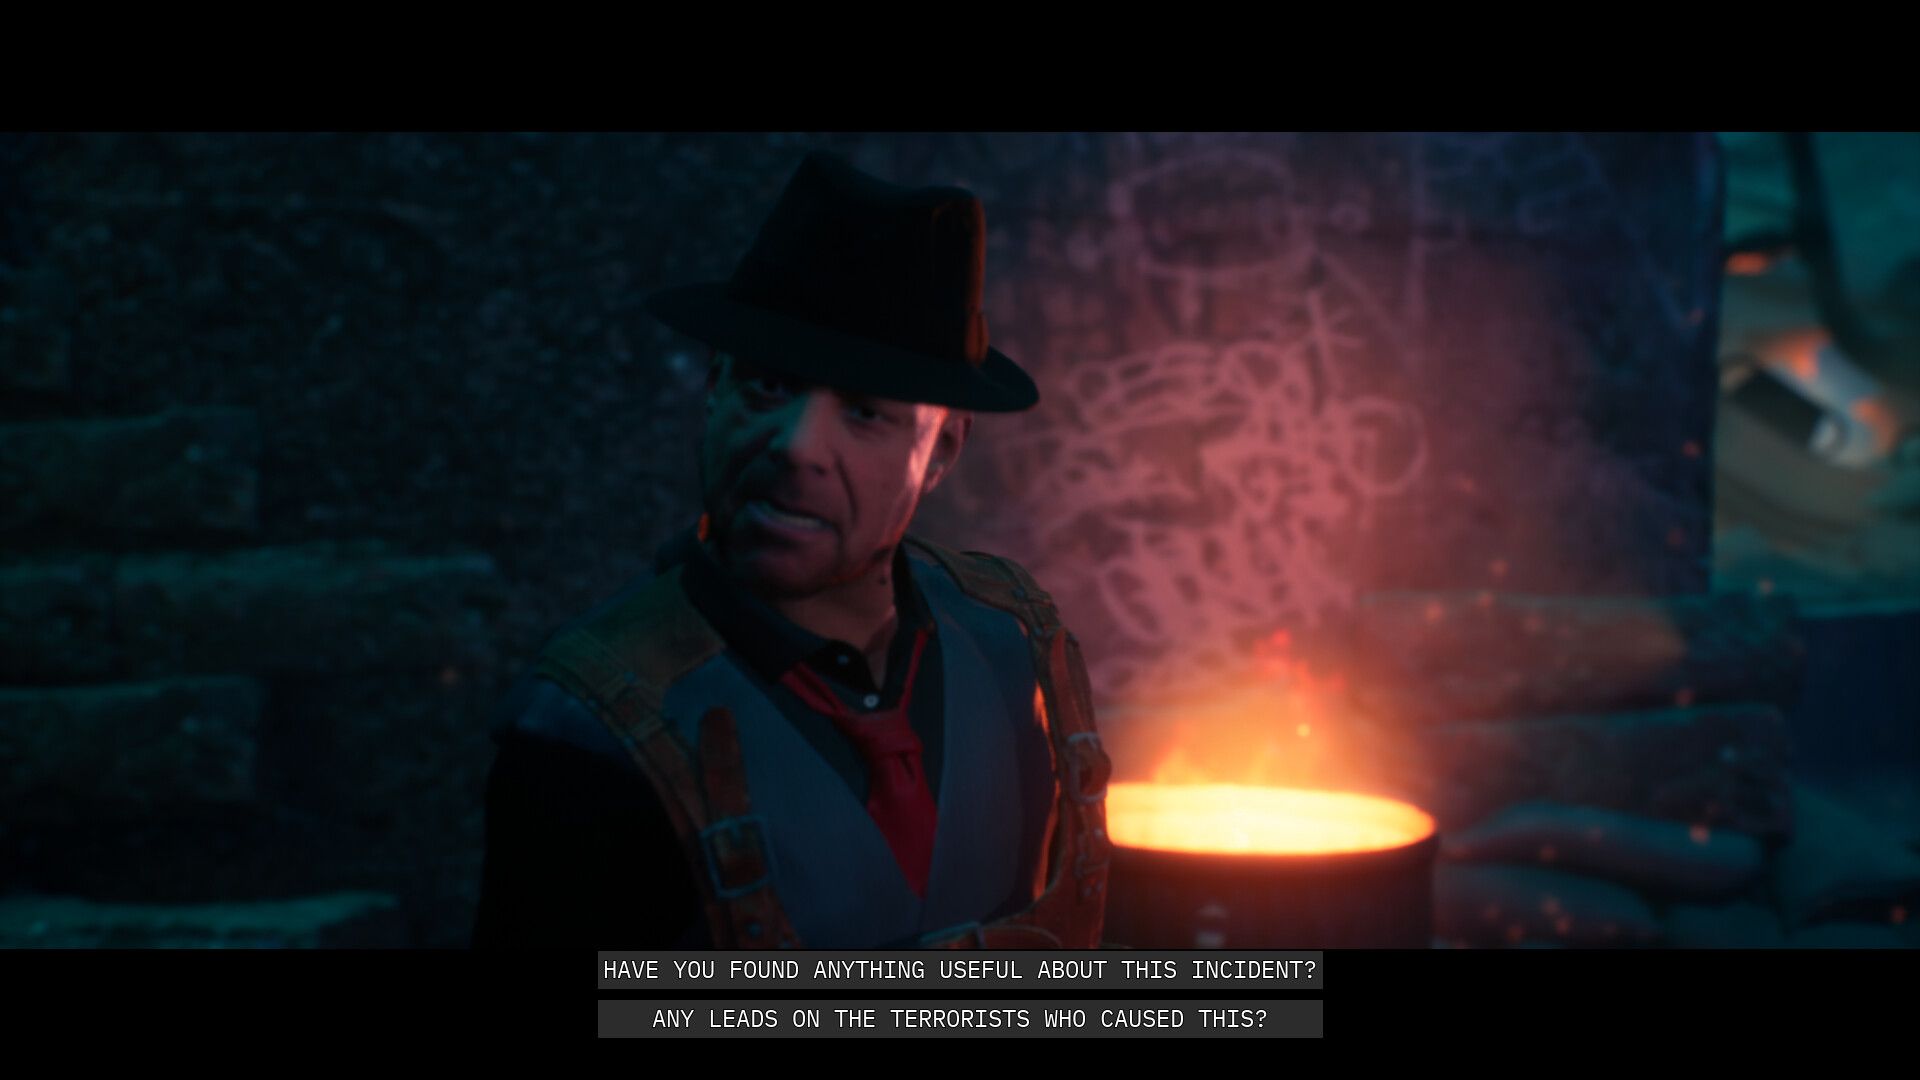 Video game screenshot of a man in a hat asking if terrorists have been caught